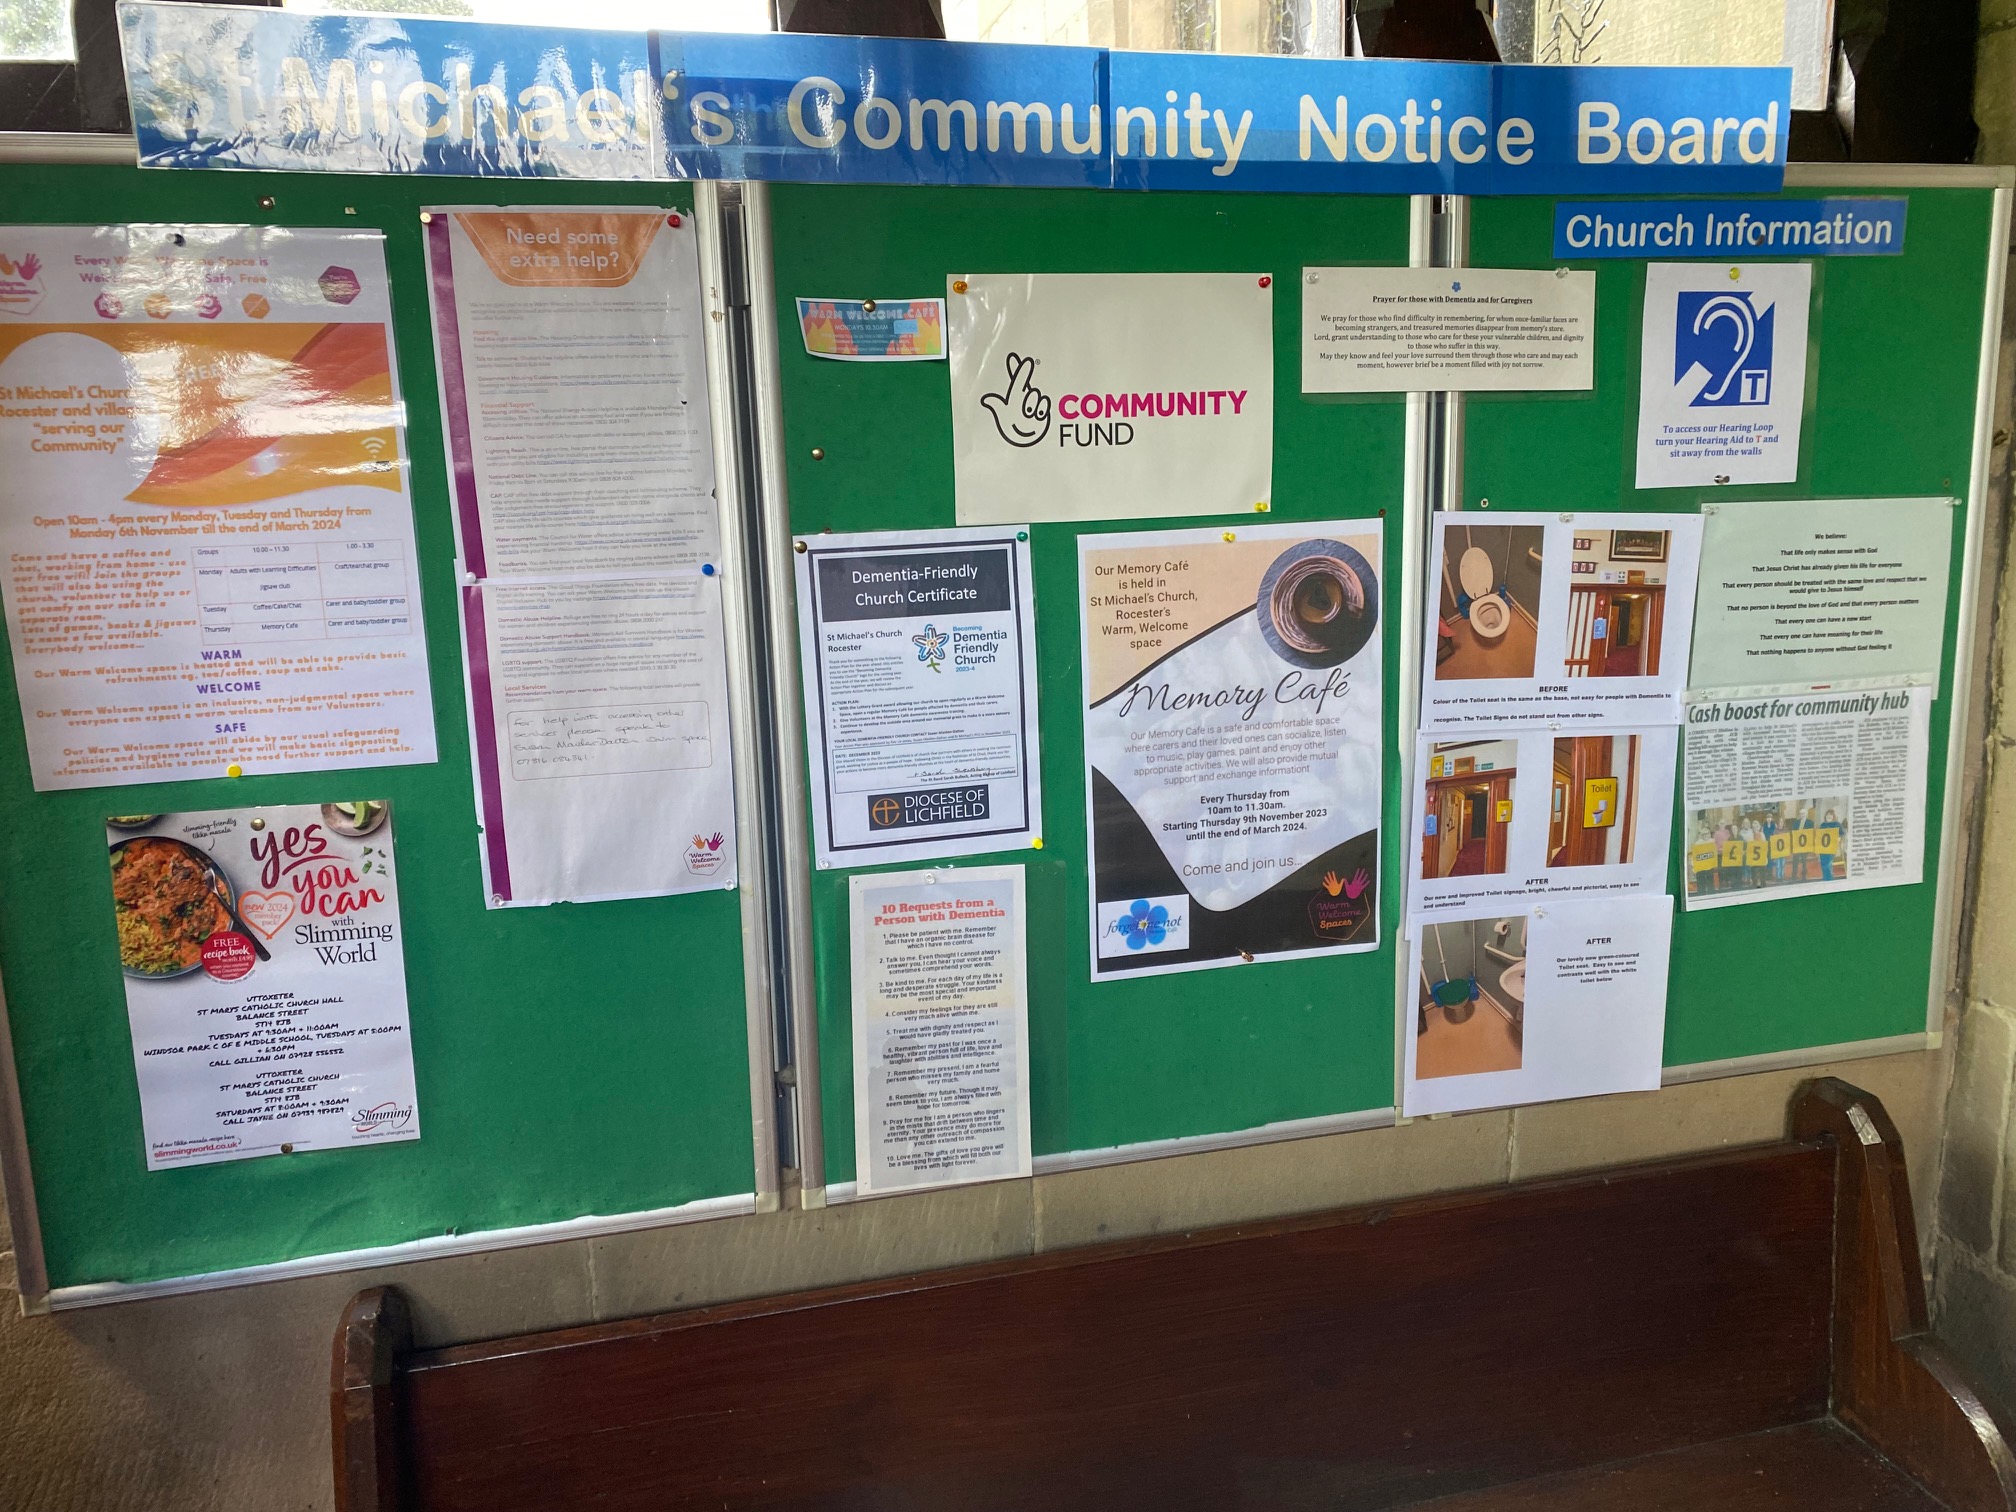 The community notice board inside the church